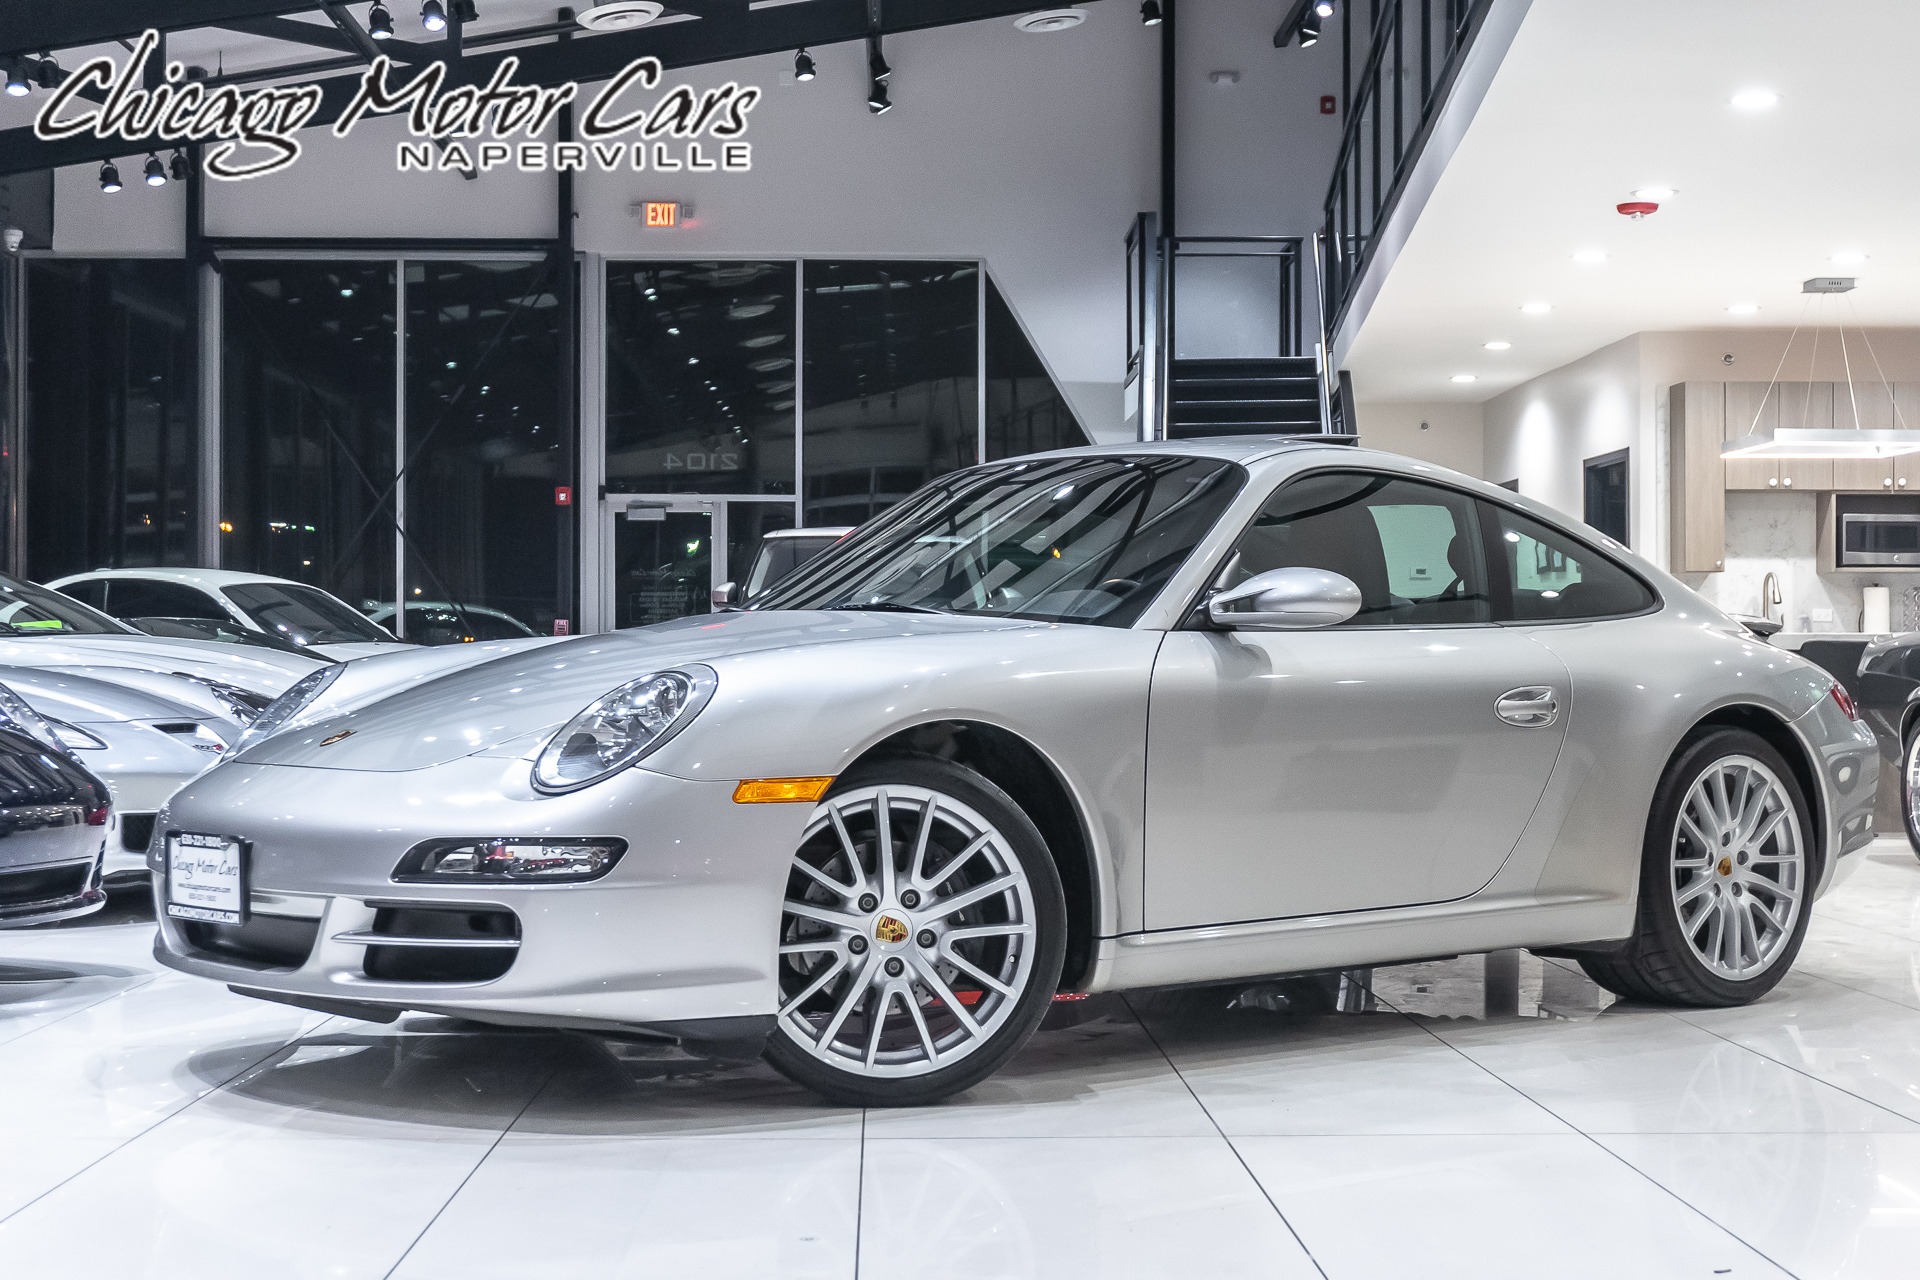 Used 2005 Porsche 911 Carrera Coupe MSRP $77K + 6-SPEED MANUAL! ONLY 13k  MILES! For Sale (Special Pricing) | Chicago Motor Cars Stock #18674